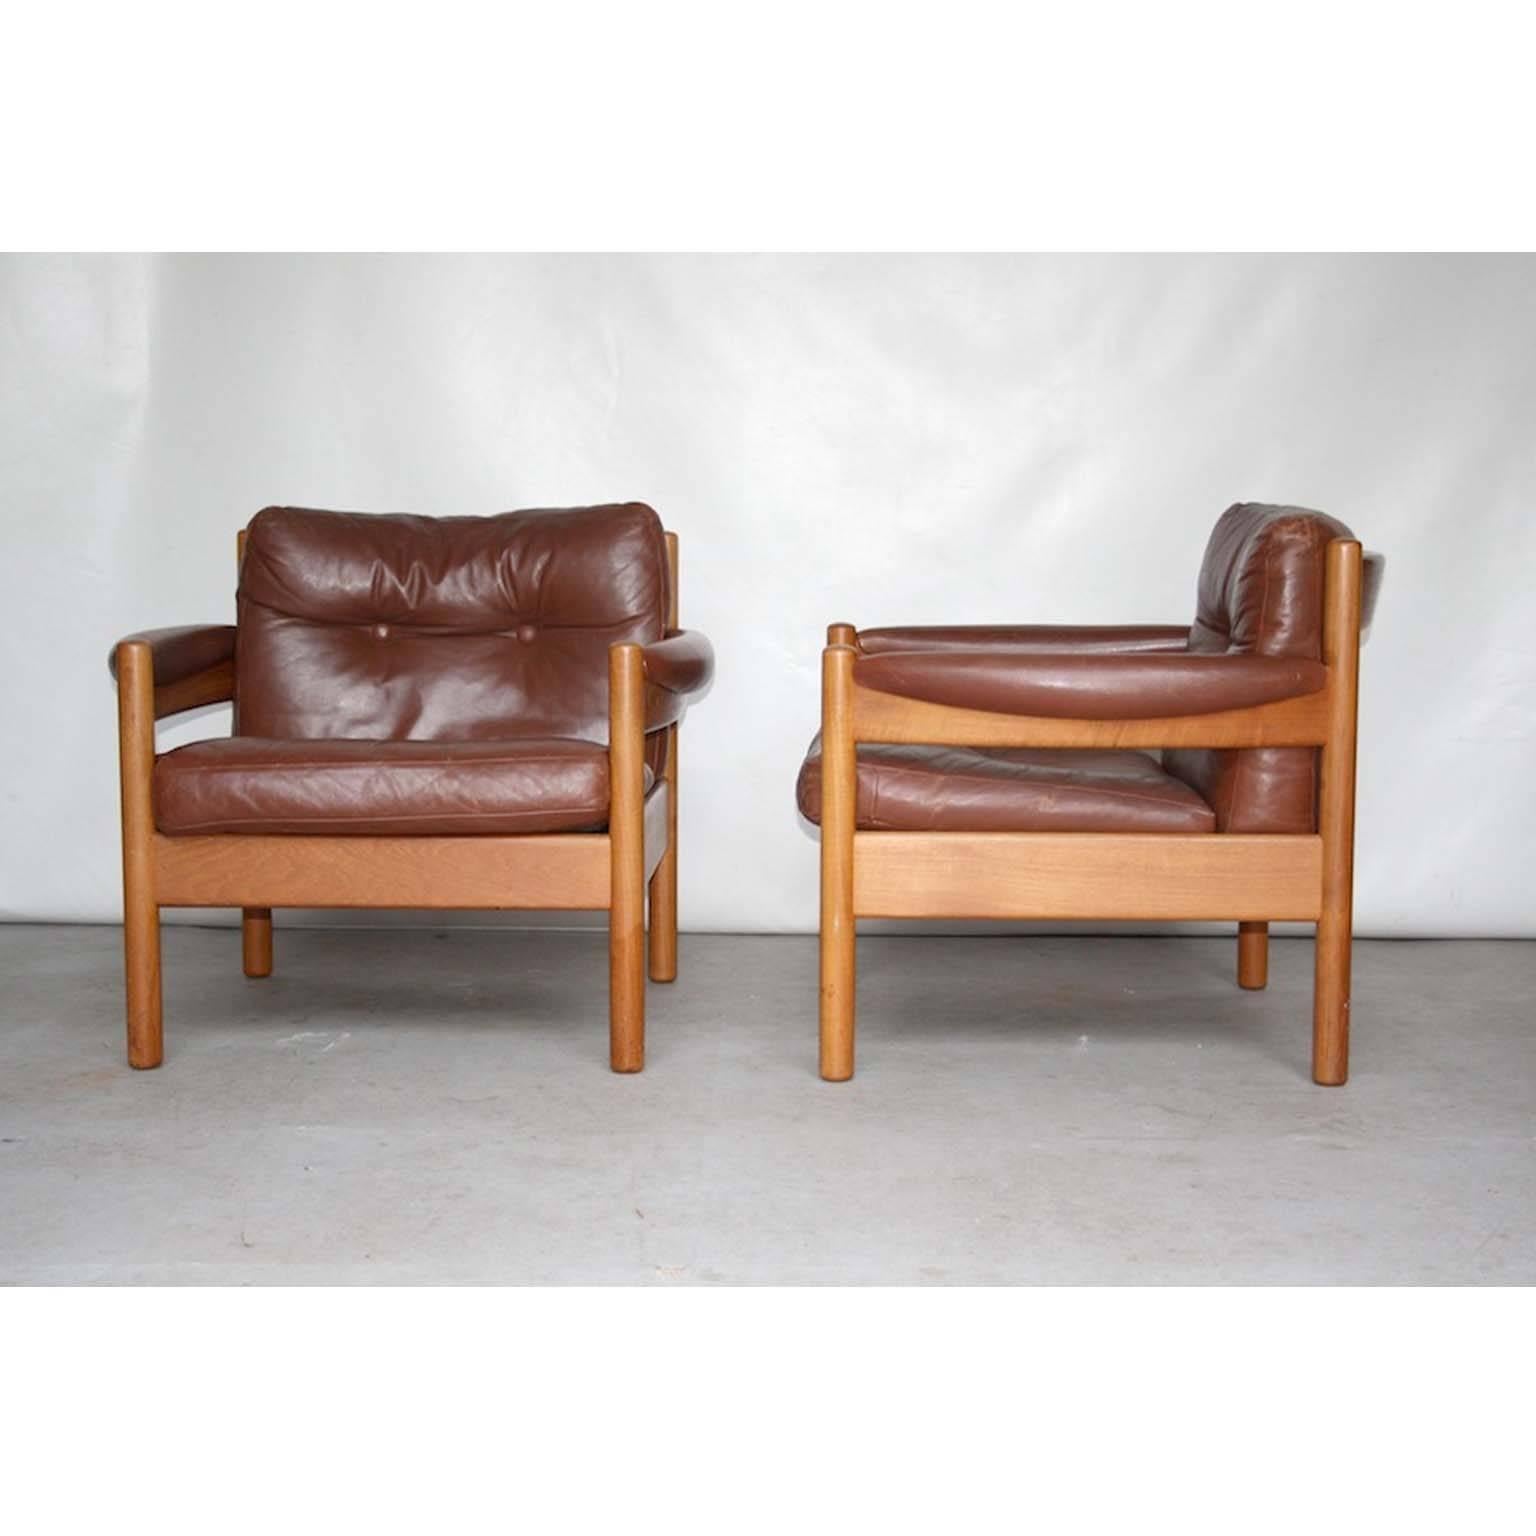 Mid-20th Century Lodge or Cottage Style Mid-Century Scandinavian Leather Lounge Chairs, 1960s